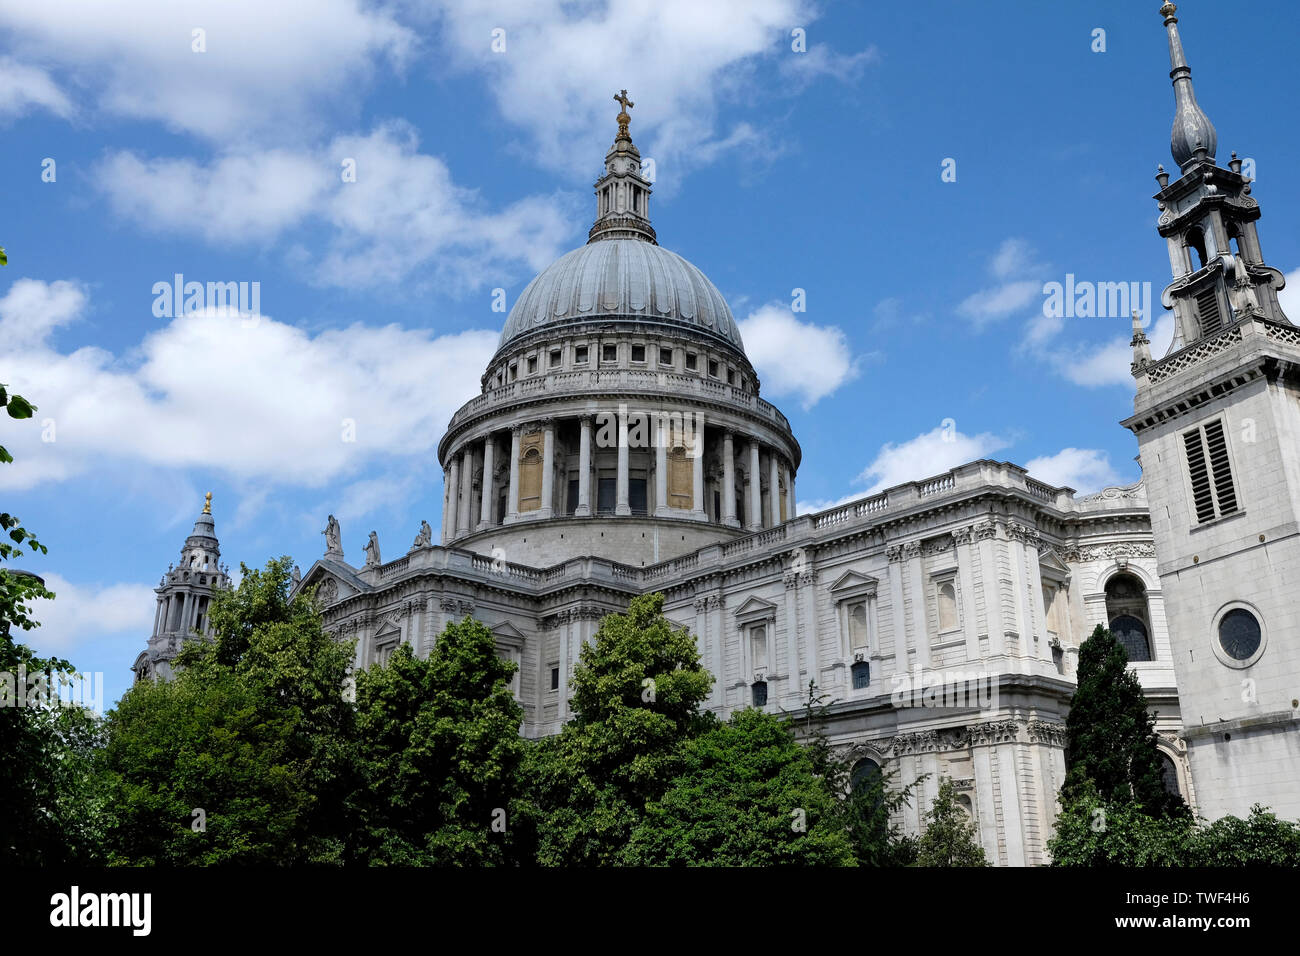 A general view of St. Paul’s cathedral in central London, UK Stock Photo